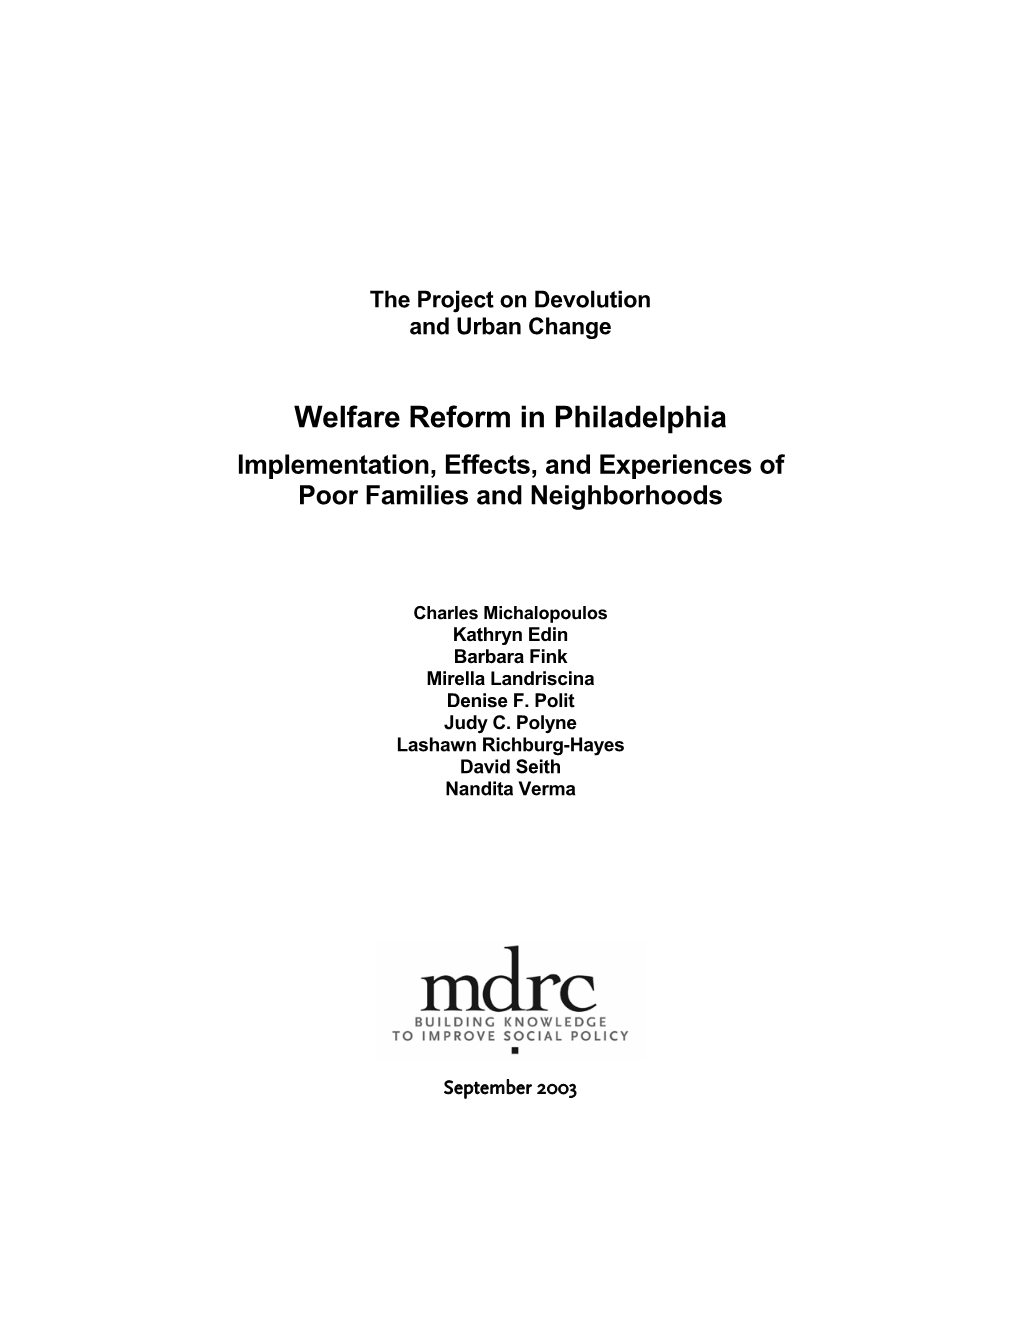 Welfare Reform in Philadelphia Implementation, Effects, and Experiences of Poor Families and Neighborhoods